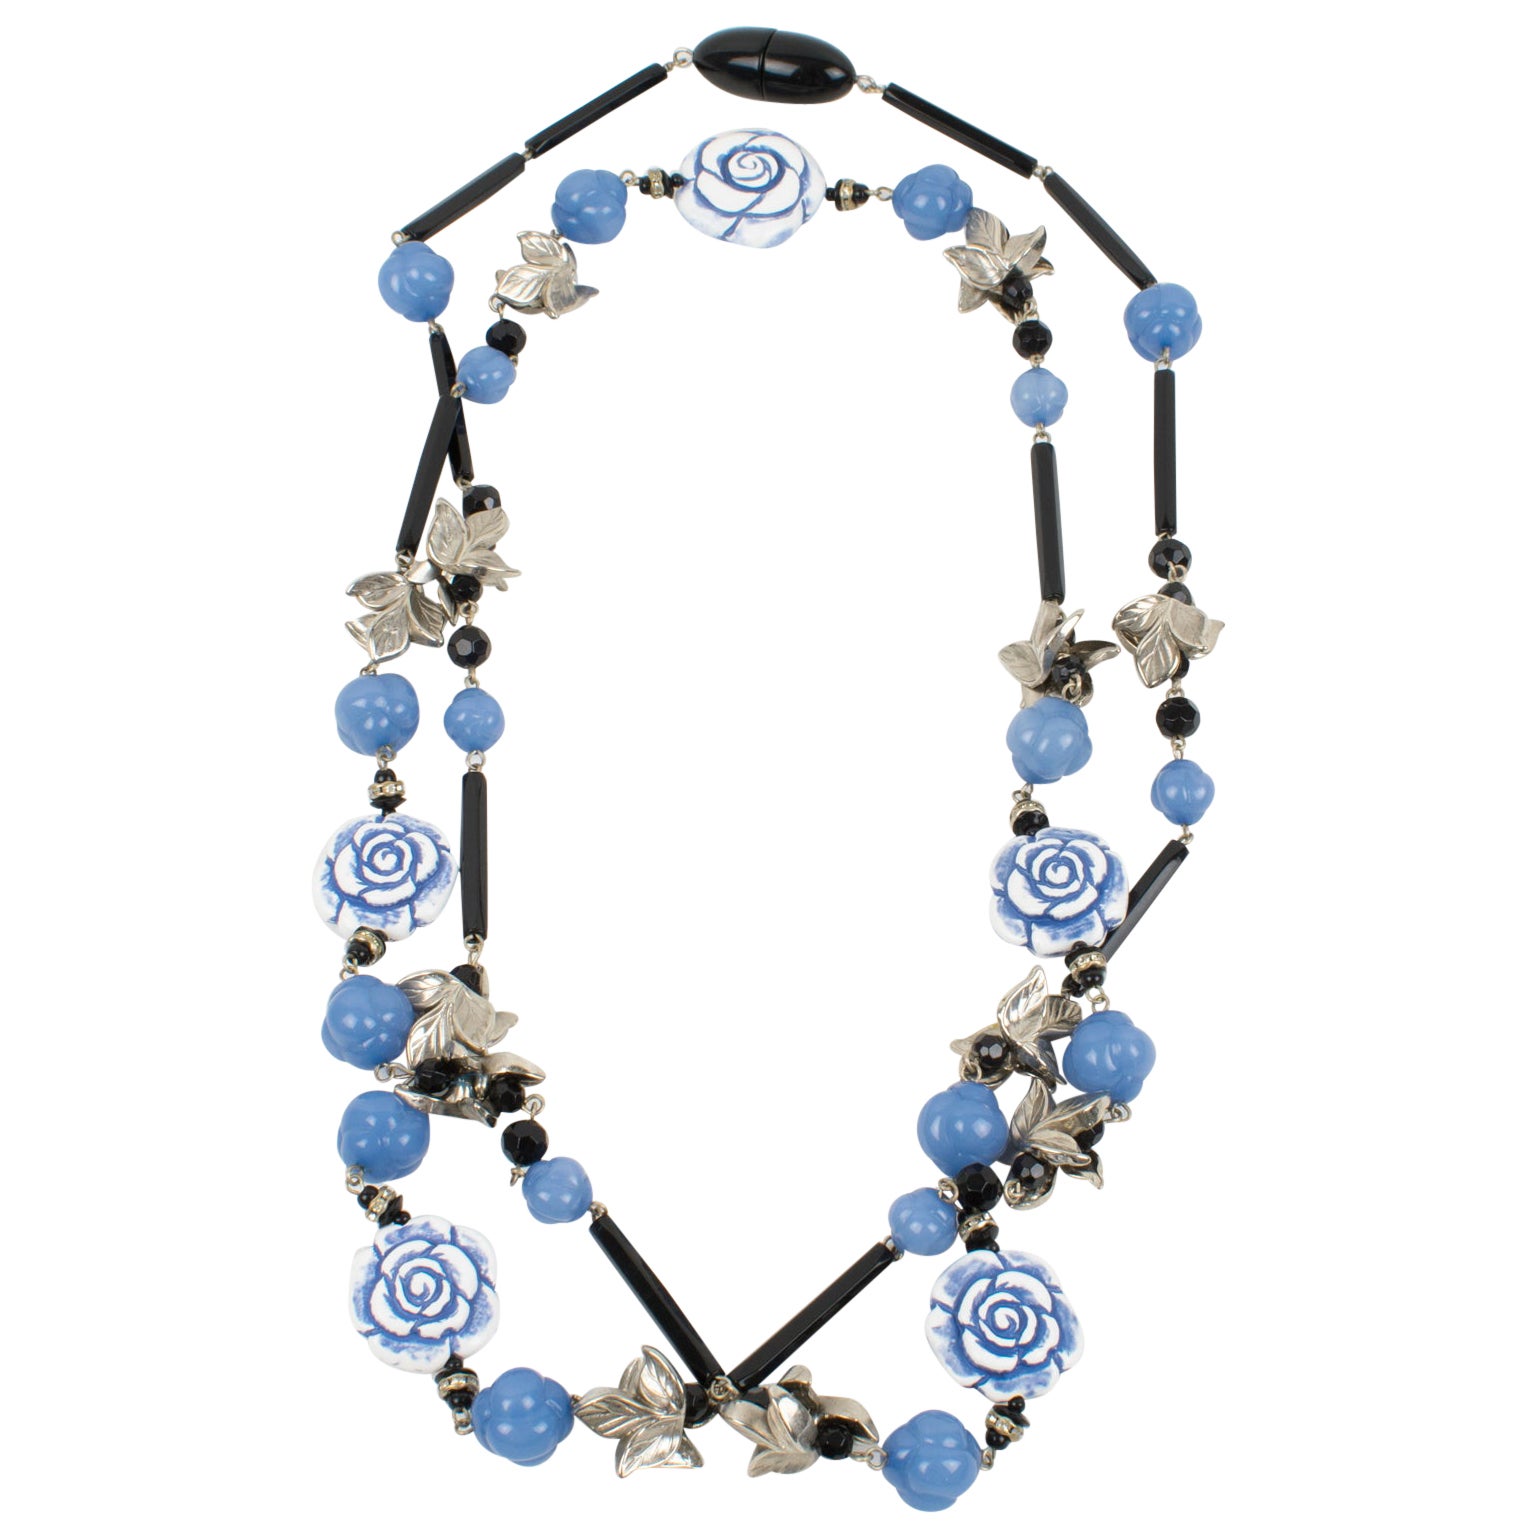 Angela Caputi Long Necklace Lavender Blue Roses and Silver Resin Leaves For Sale